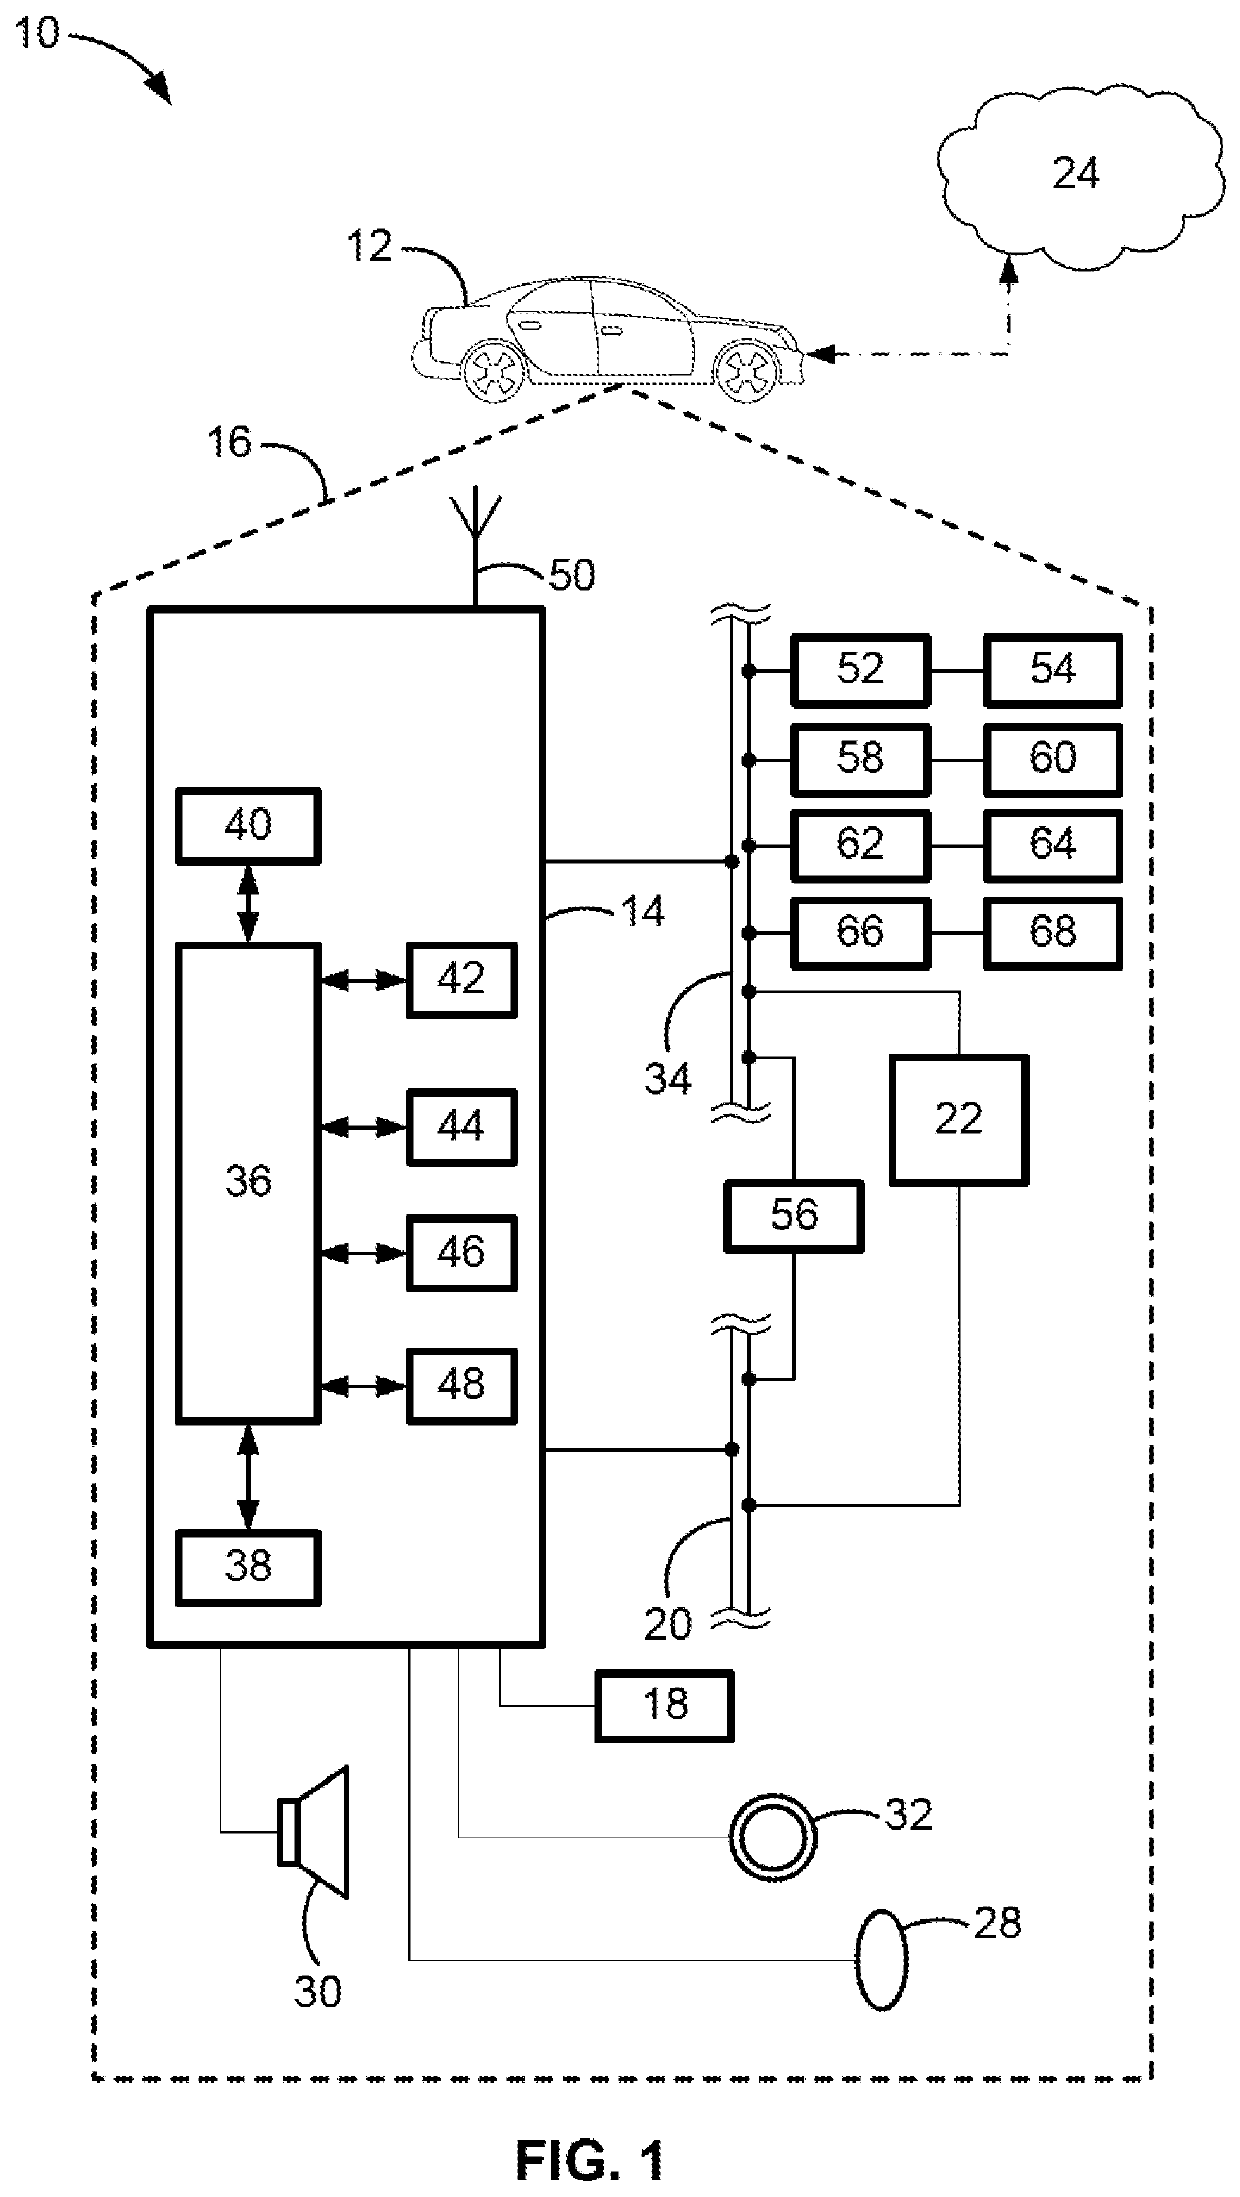 Intelligent motor vehicles, systems, and control logic for real-time eco-routing and adaptive driving control